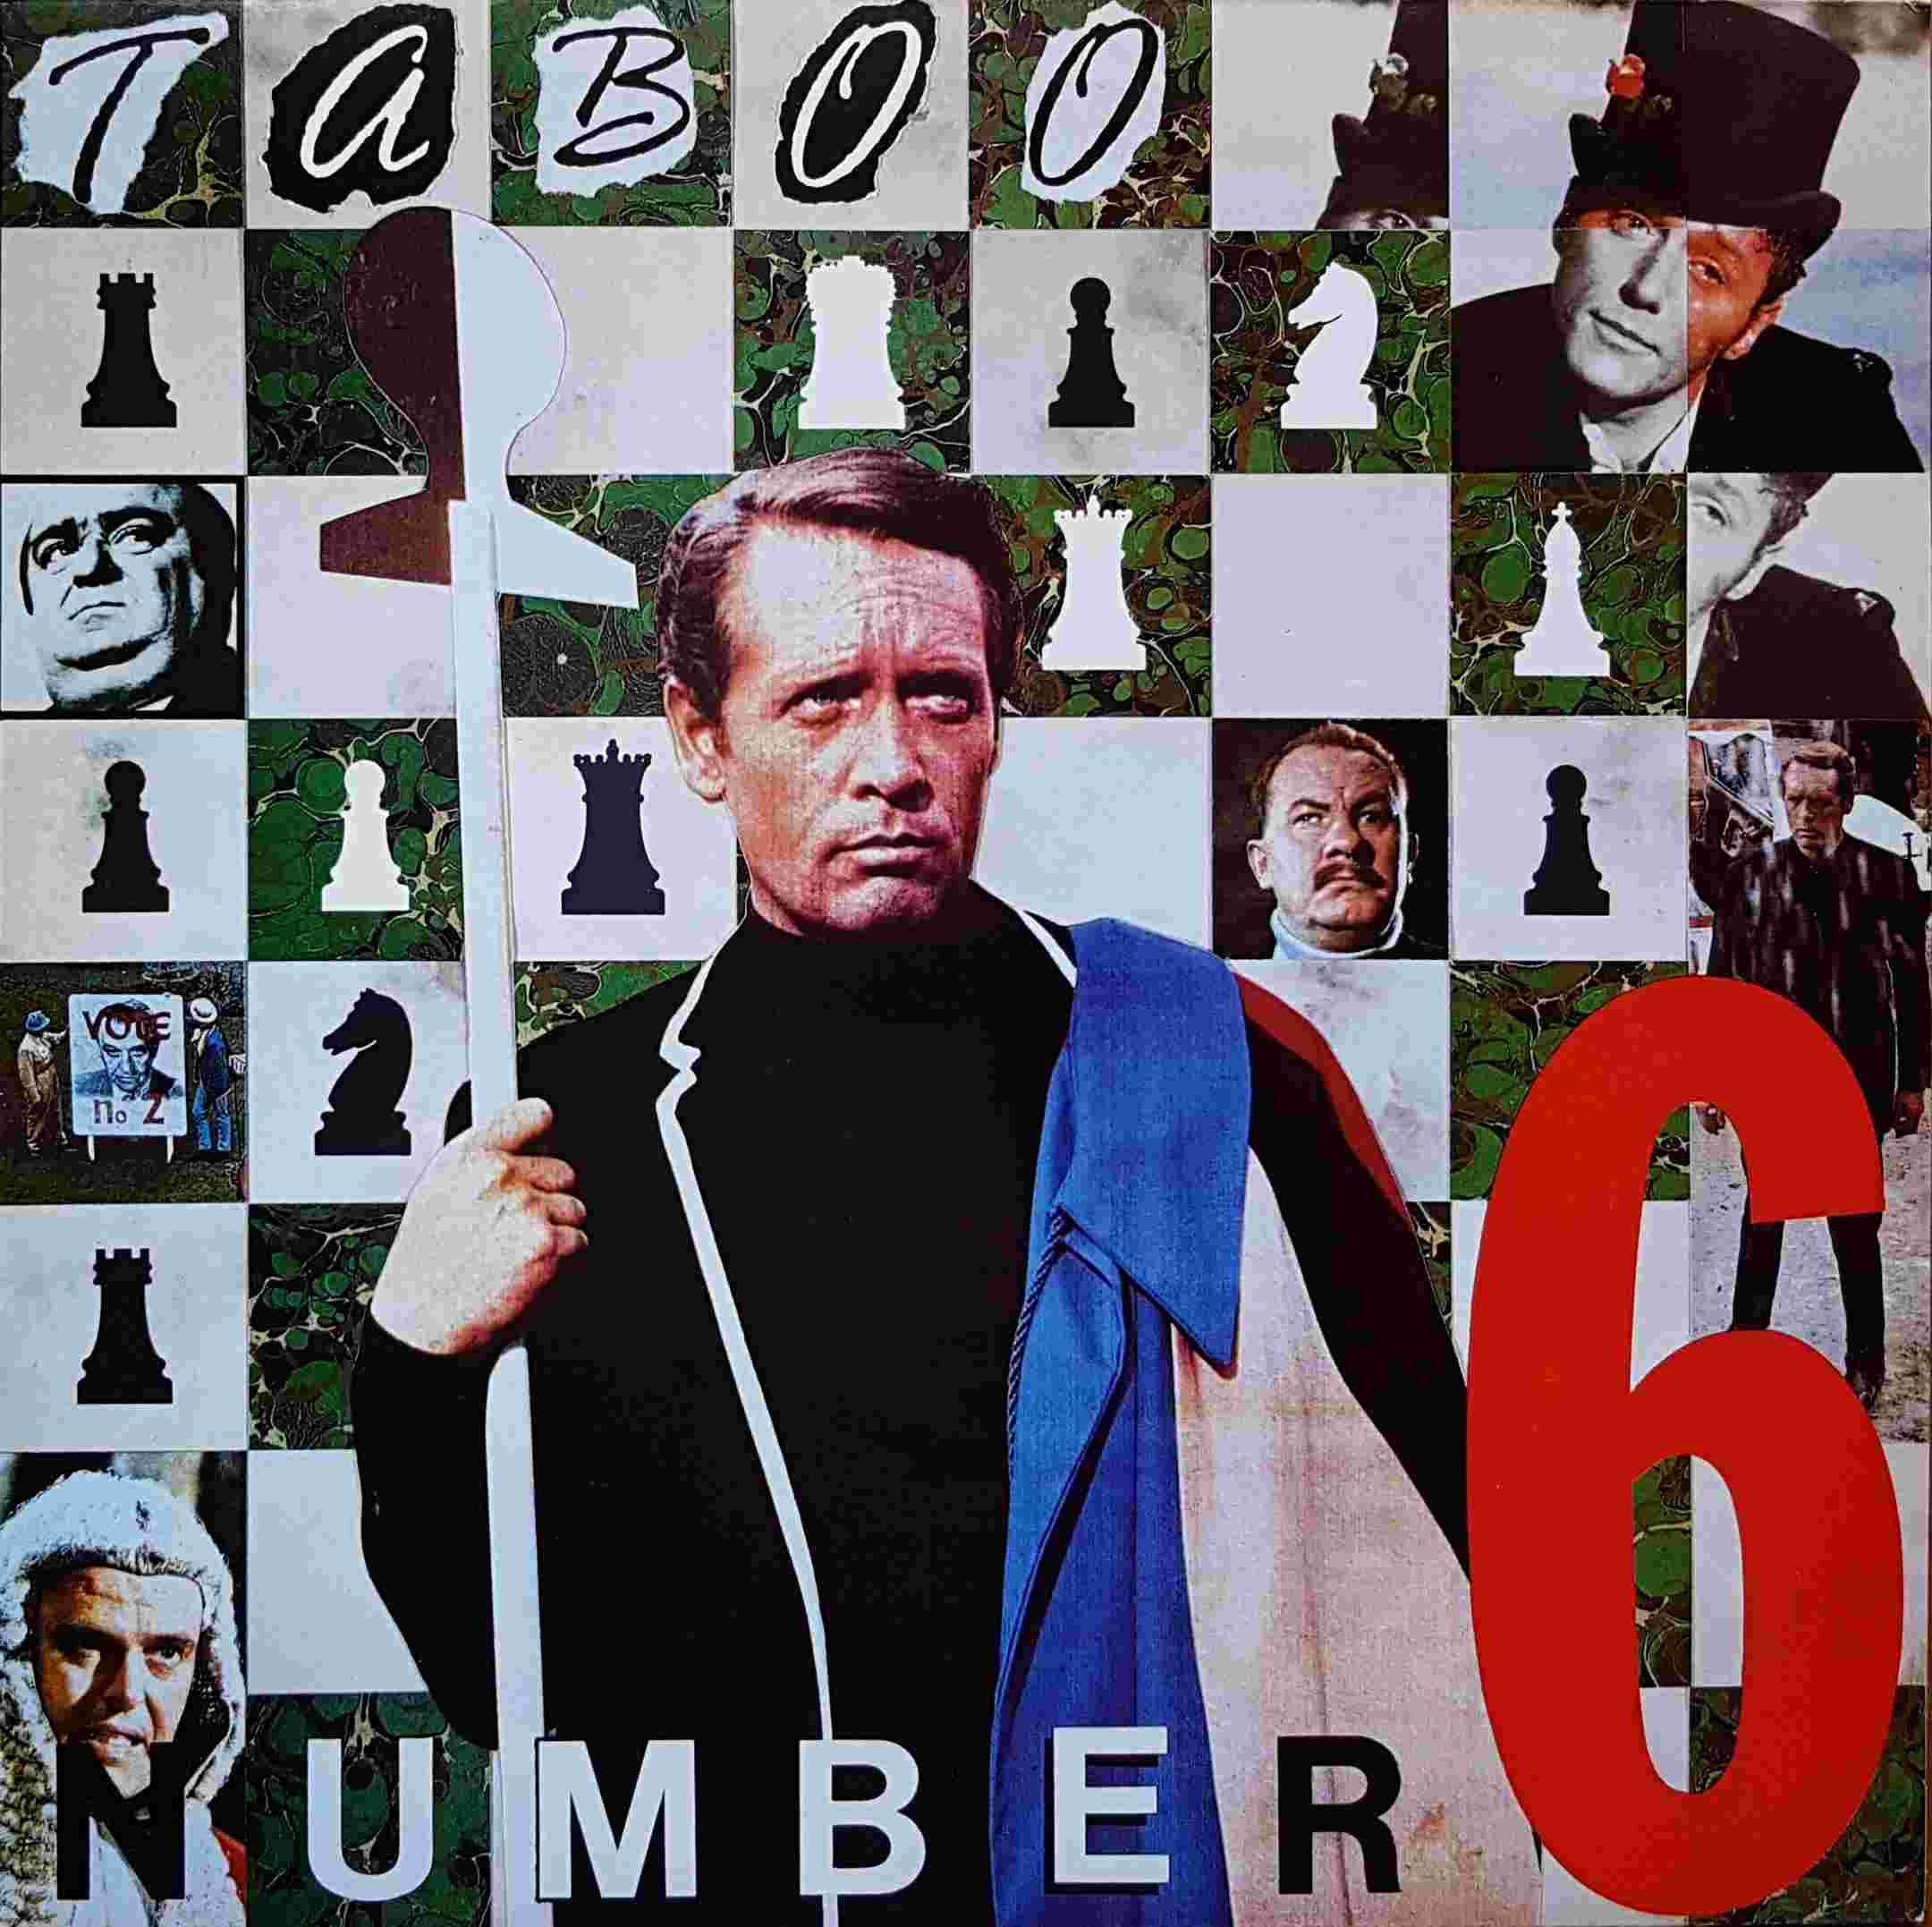 Picture of 12 ANA 44 Number 6 (The prisoner) by artist Taboo from ITV, Channel 4 and Channel 5 12inches library